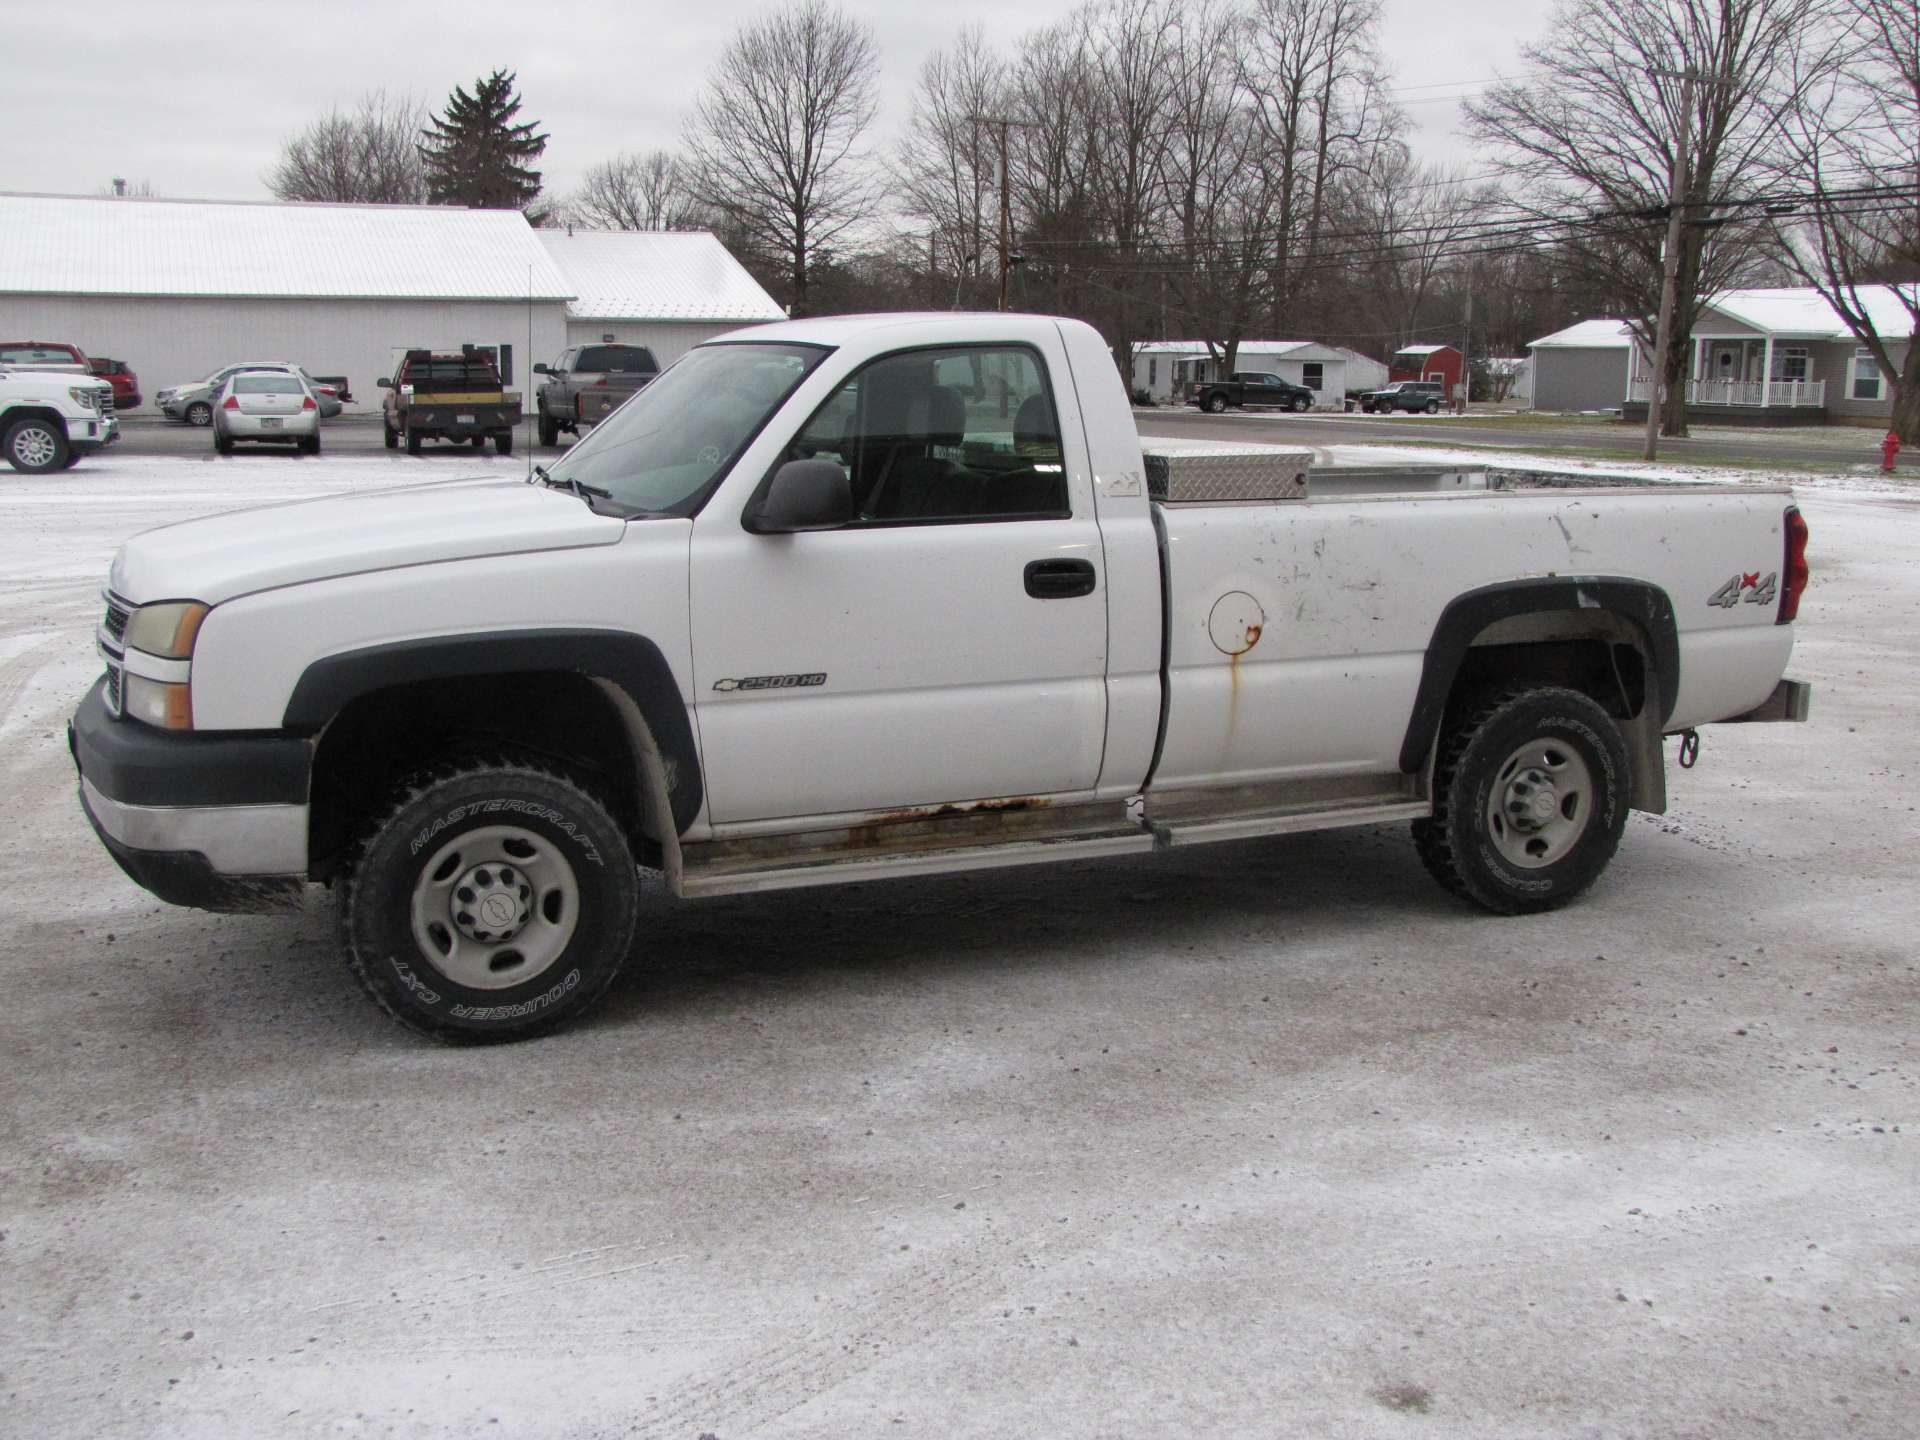 2006 Chevy 2500 HD pickup truck - Image 14 of 63